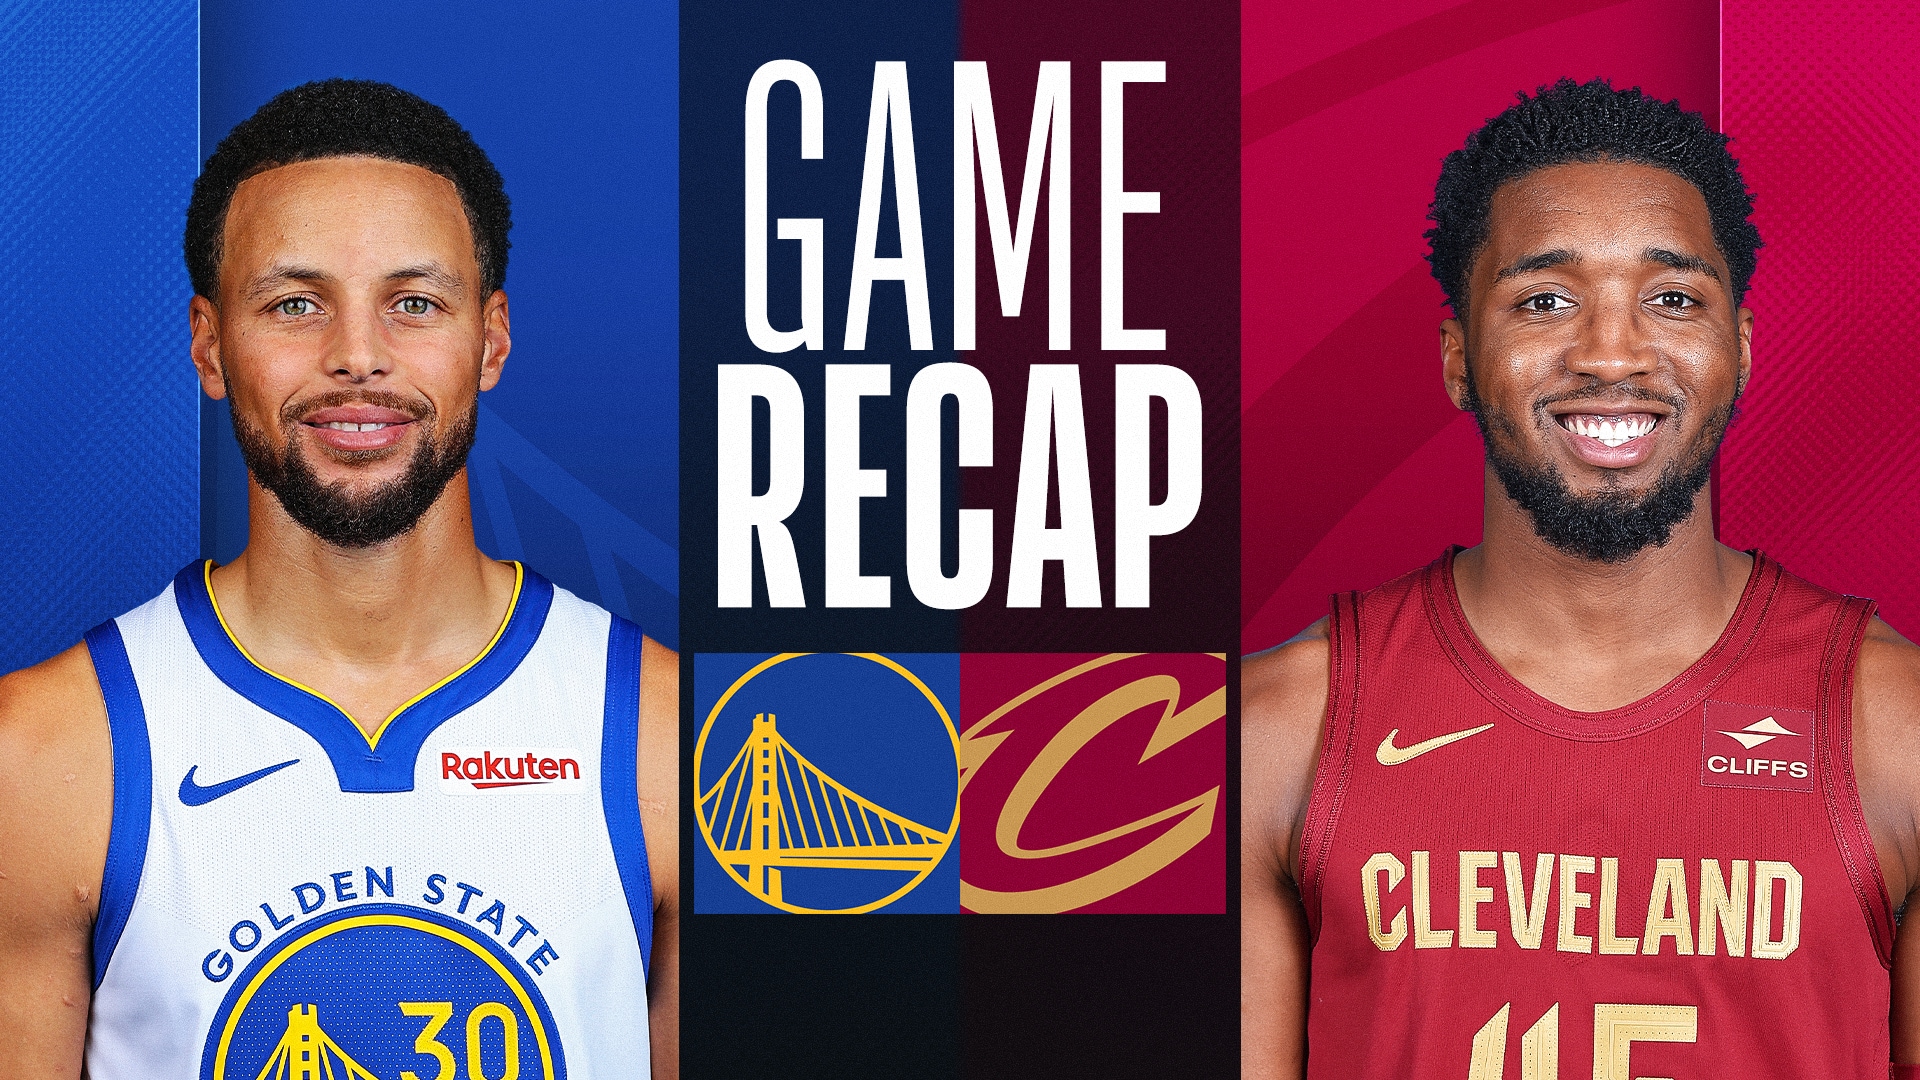 golden state warriors vs cleveland cavaliers match player stats